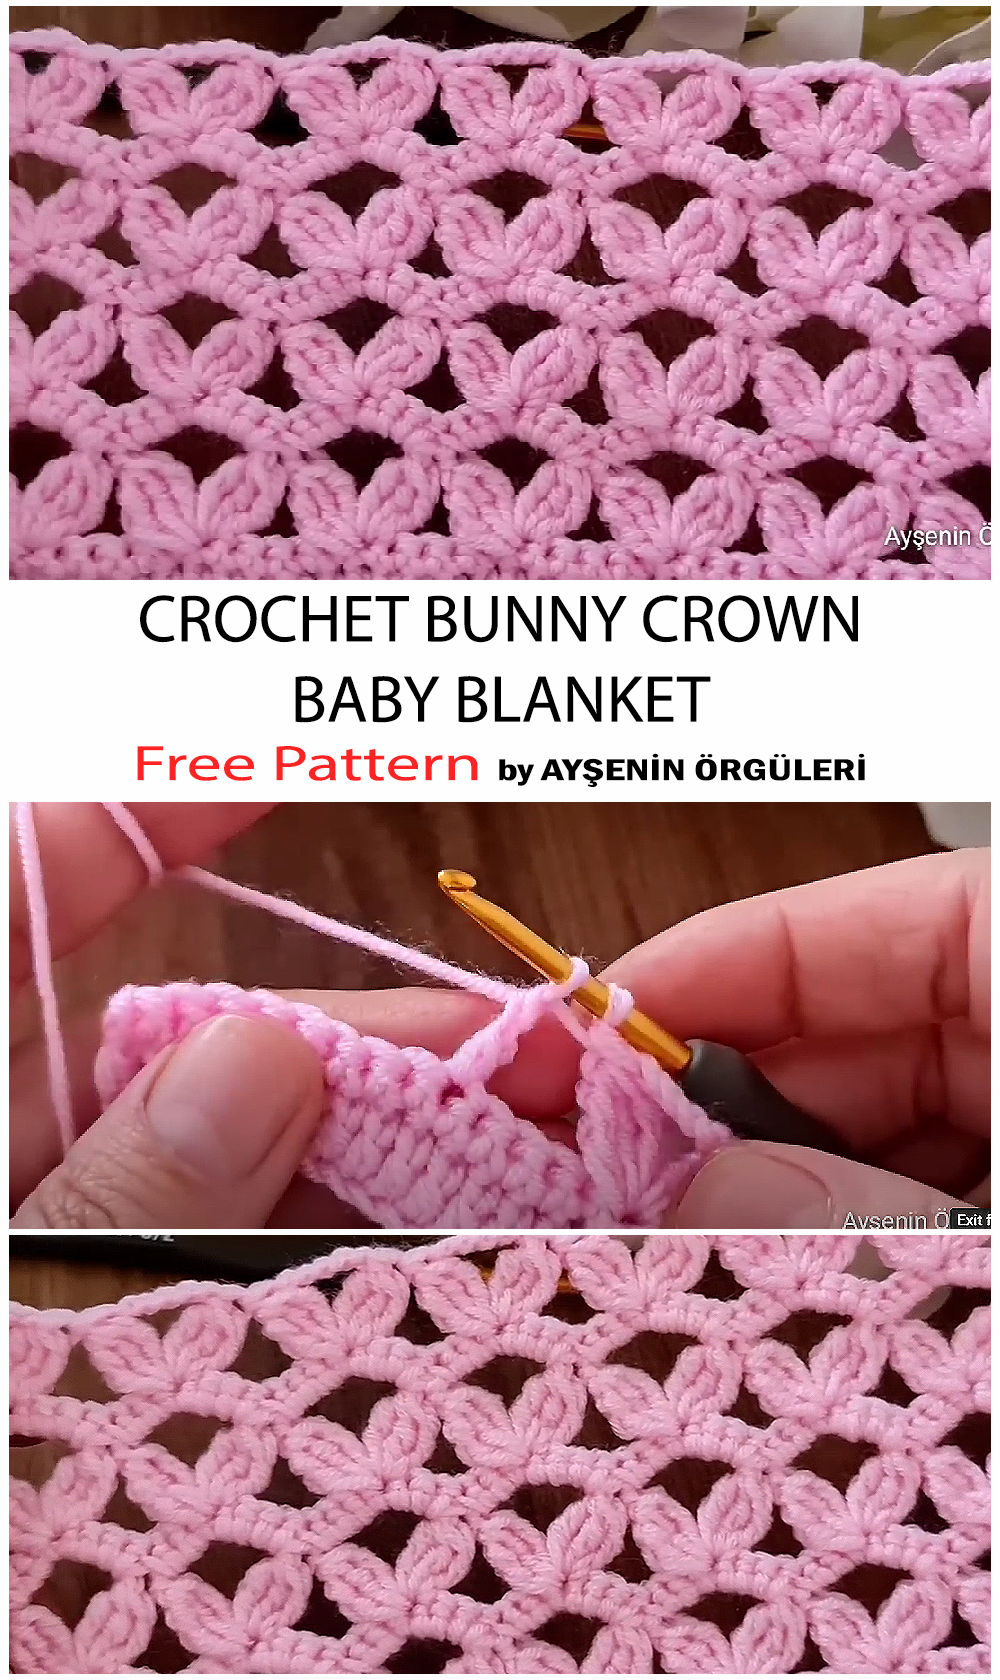 How To Crochet Bunny Crown Stitch Baby Blanket - Free Pattern For Beginners